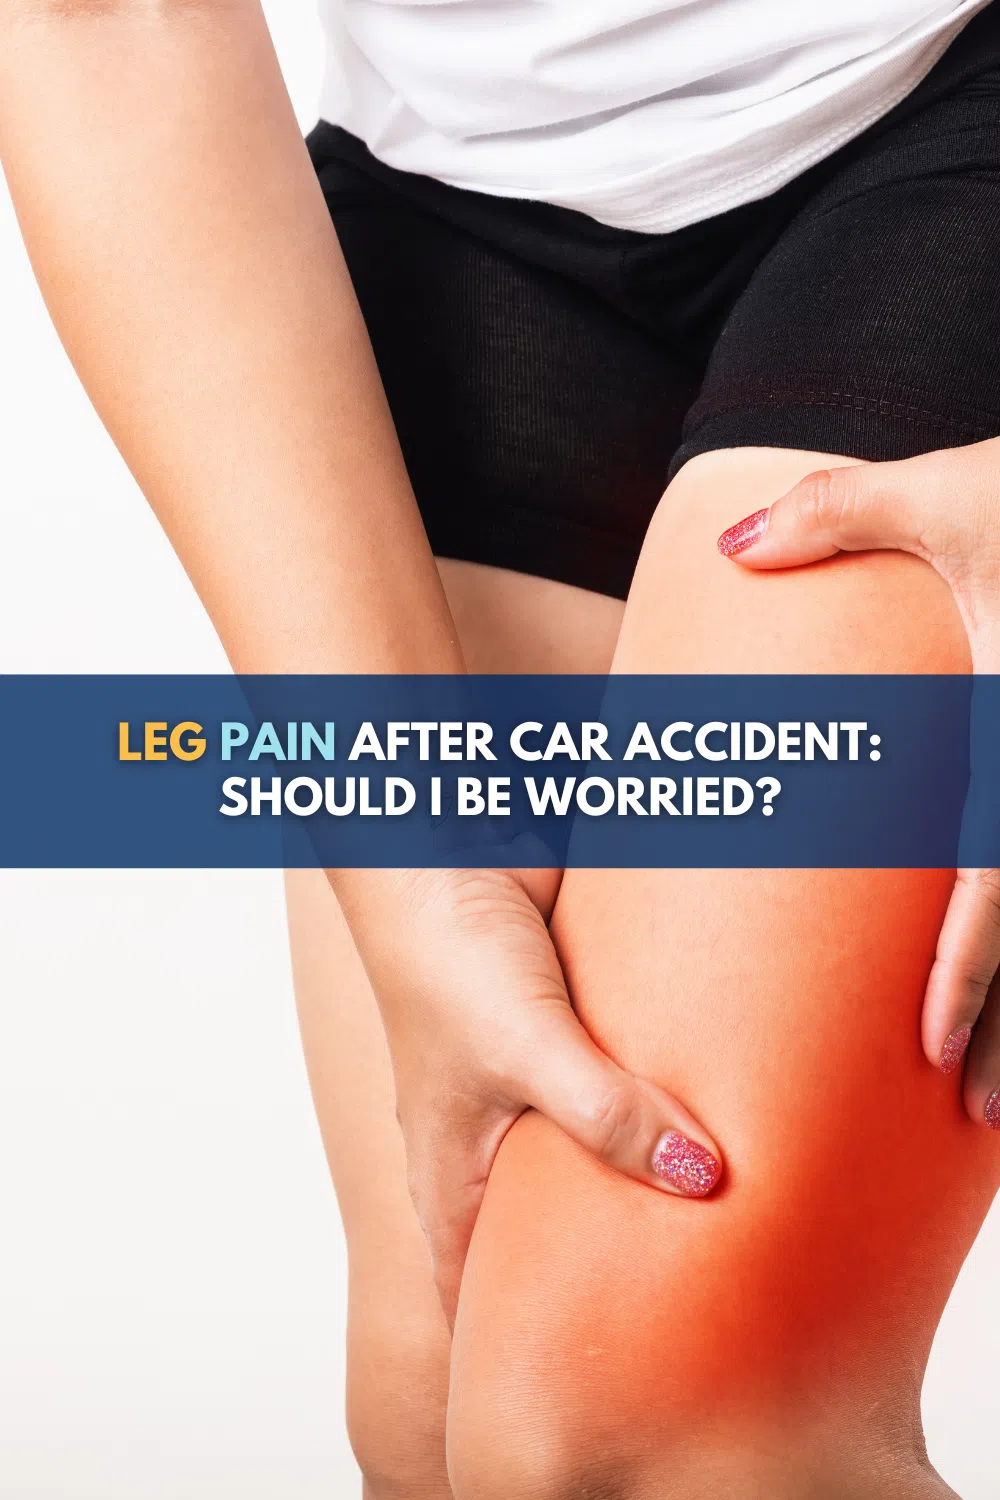 Leg Pain After Car Accident: Should I Be Worried?